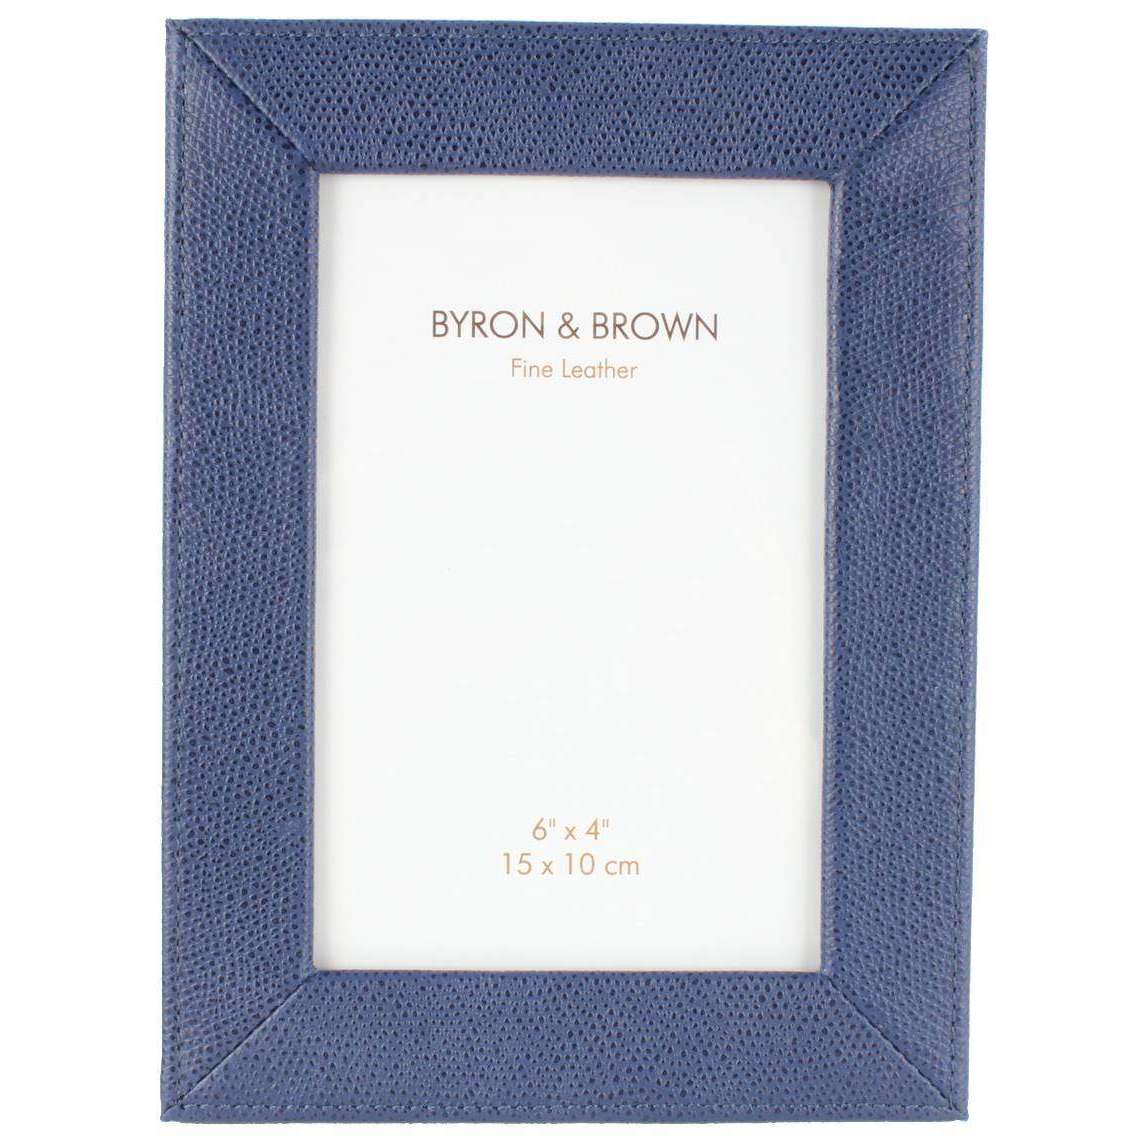 Byron and Brown Florence Slim Classic Leather Photo Frame 6x4 - Blue